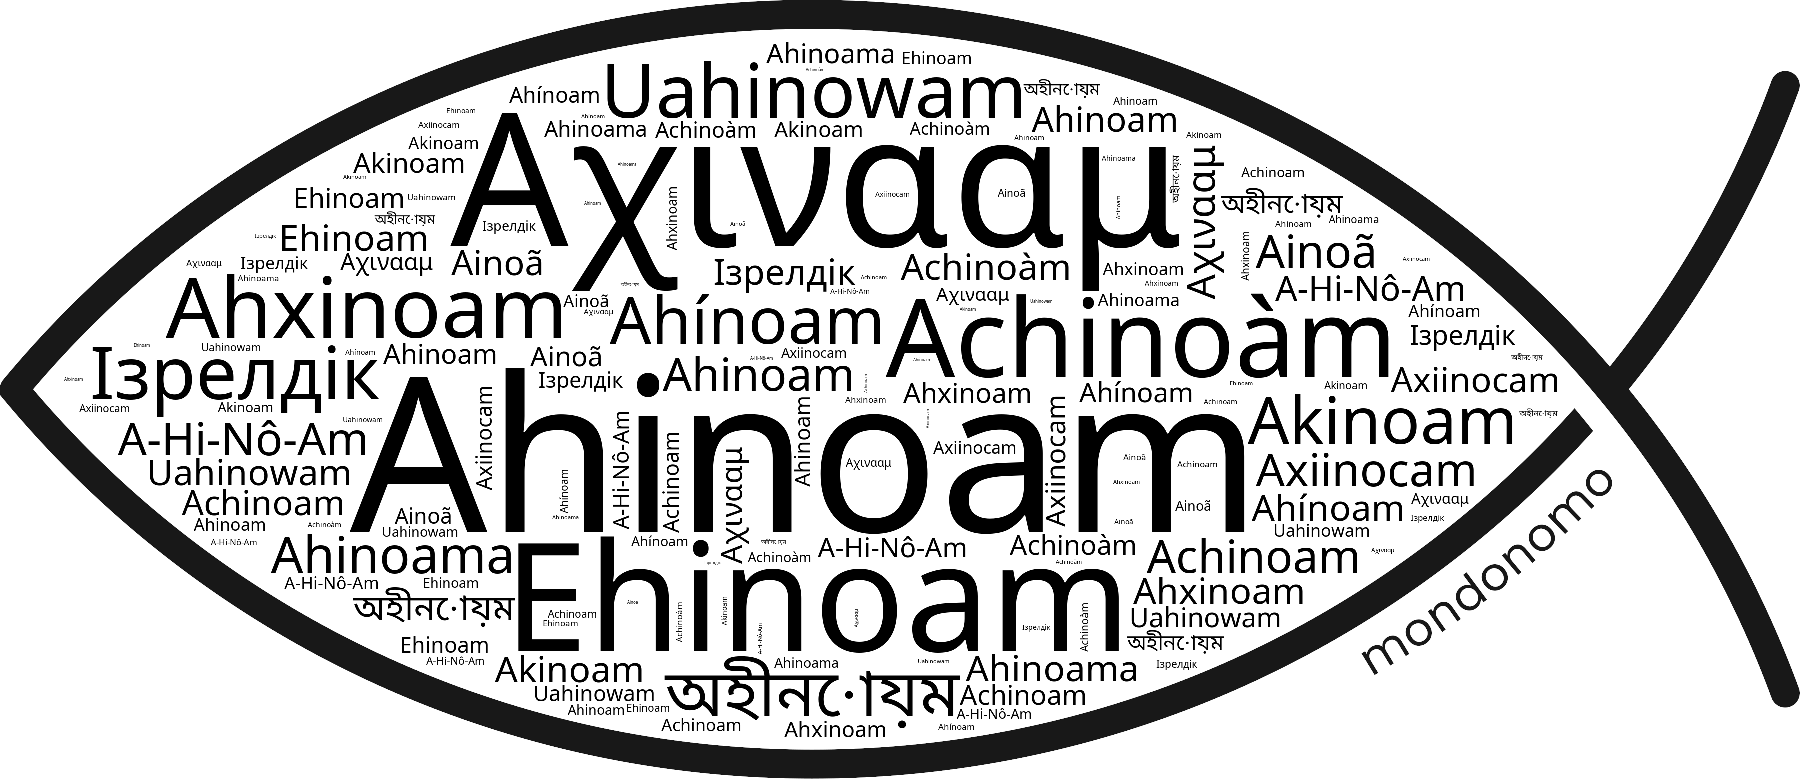 Name Ahinoam in the world's Bibles